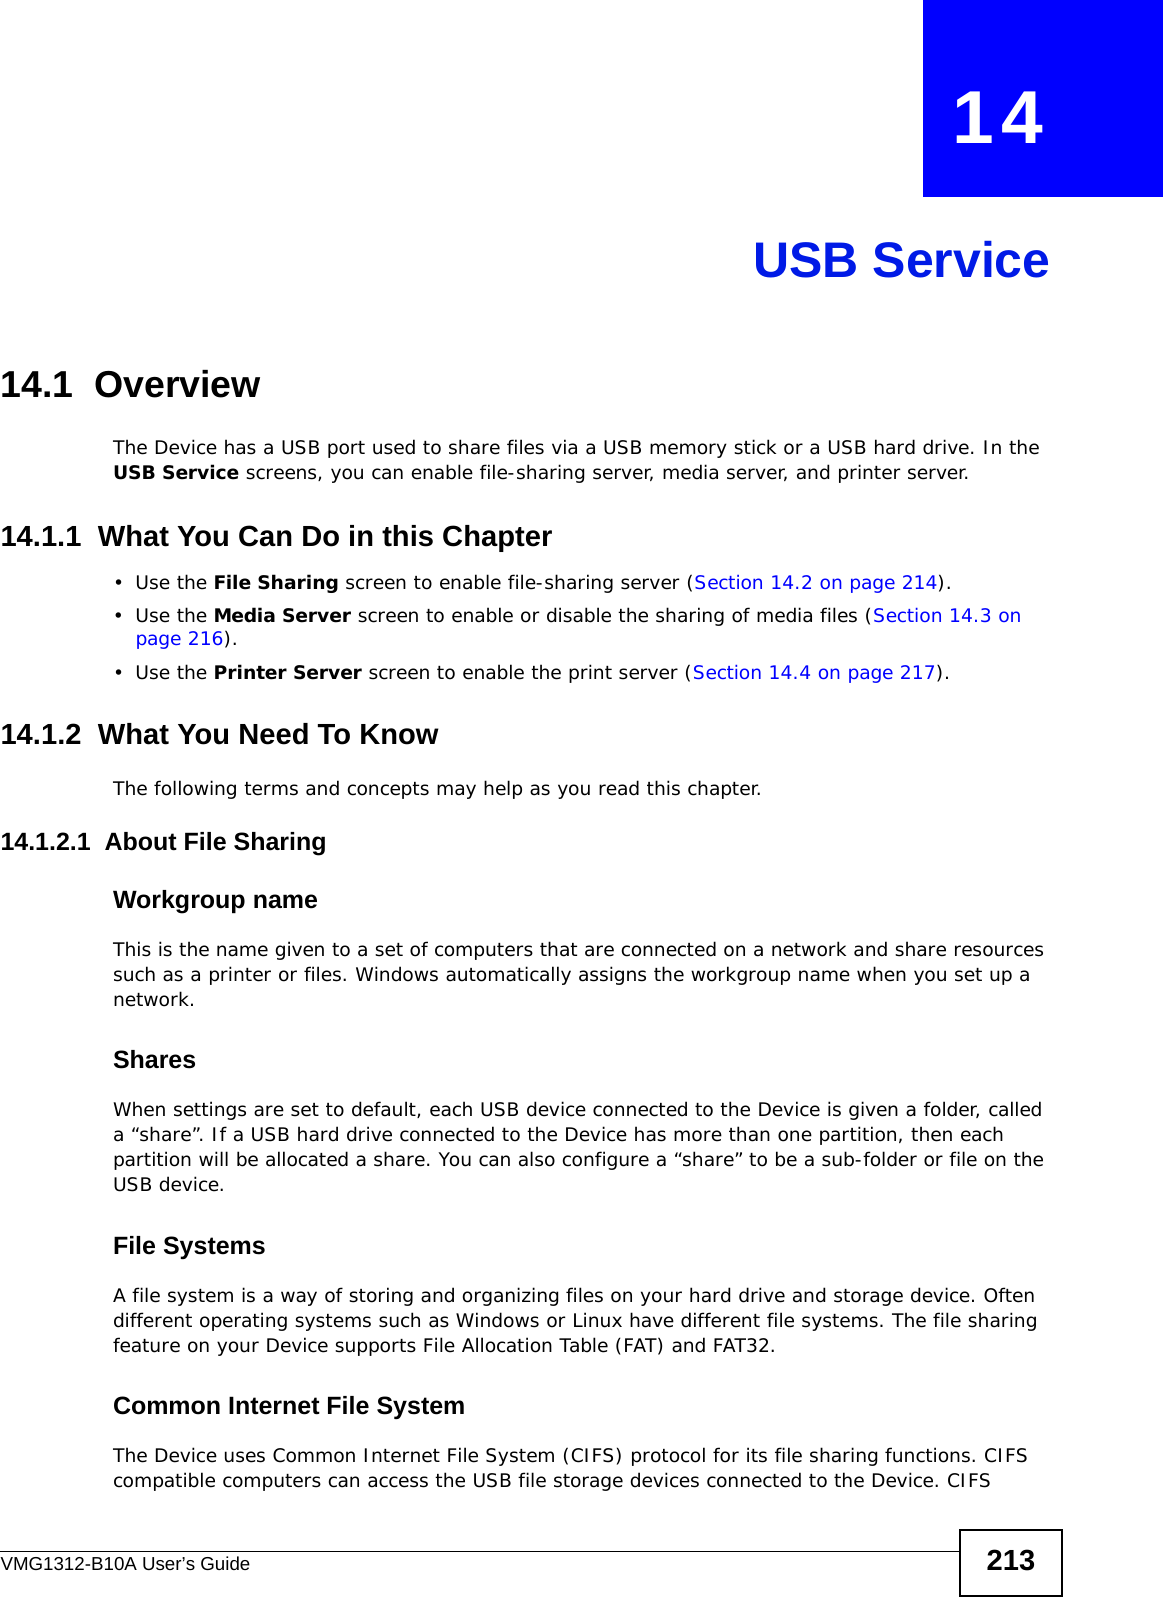 VMG1312-B10A User’s Guide 213CHAPTER   14USB Service14.1  Overview The Device has a USB port used to share files via a USB memory stick or a USB hard drive. In the USB Service screens, you can enable file-sharing server, media server, and printer server.14.1.1  What You Can Do in this Chapter•Use the File Sharing screen to enable file-sharing server (Section 14.2 on page 214). •Use the Media Server screen to enable or disable the sharing of media files (Section 14.3 on page 216).•Use the Printer Server screen to enable the print server (Section 14.4 on page 217).14.1.2  What You Need To KnowThe following terms and concepts may help as you read this chapter.14.1.2.1  About File SharingWorkgroup nameThis is the name given to a set of computers that are connected on a network and share resources such as a printer or files. Windows automatically assigns the workgroup name when you set up a network. SharesWhen settings are set to default, each USB device connected to the Device is given a folder, called a “share”. If a USB hard drive connected to the Device has more than one partition, then each partition will be allocated a share. You can also configure a “share” to be a sub-folder or file on the USB device.File SystemsA file system is a way of storing and organizing files on your hard drive and storage device. Often different operating systems such as Windows or Linux have different file systems. The file sharing feature on your Device supports File Allocation Table (FAT) and FAT32. Common Internet File SystemThe Device uses Common Internet File System (CIFS) protocol for its file sharing functions. CIFS compatible computers can access the USB file storage devices connected to the Device. CIFS 